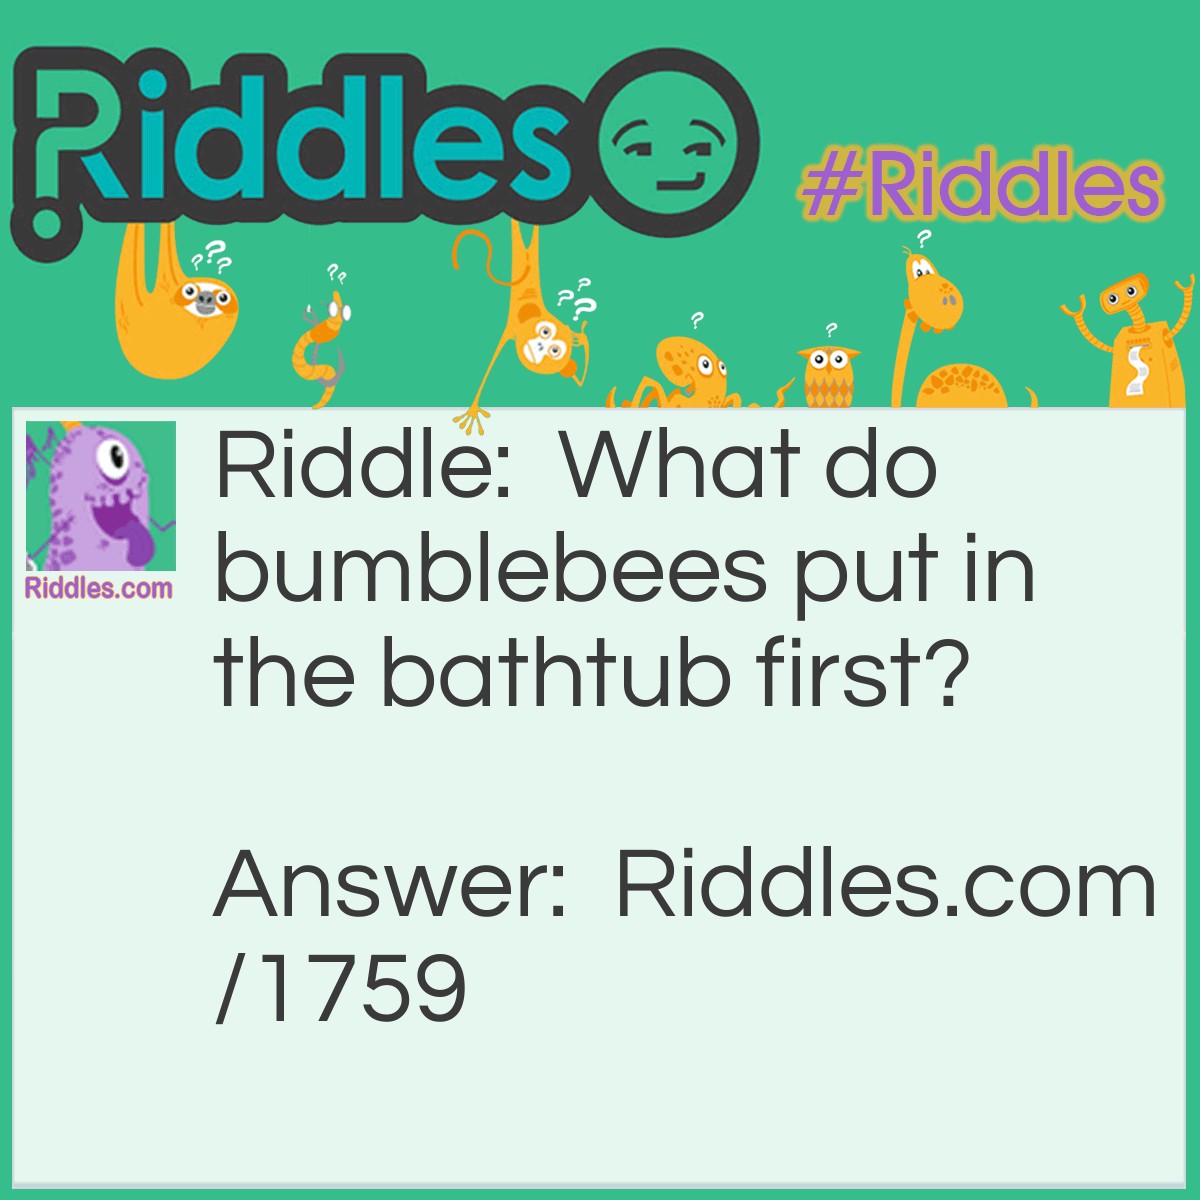 Riddle: What do bumblebees put in the bathtub first? Answer: Their bee-hinds.